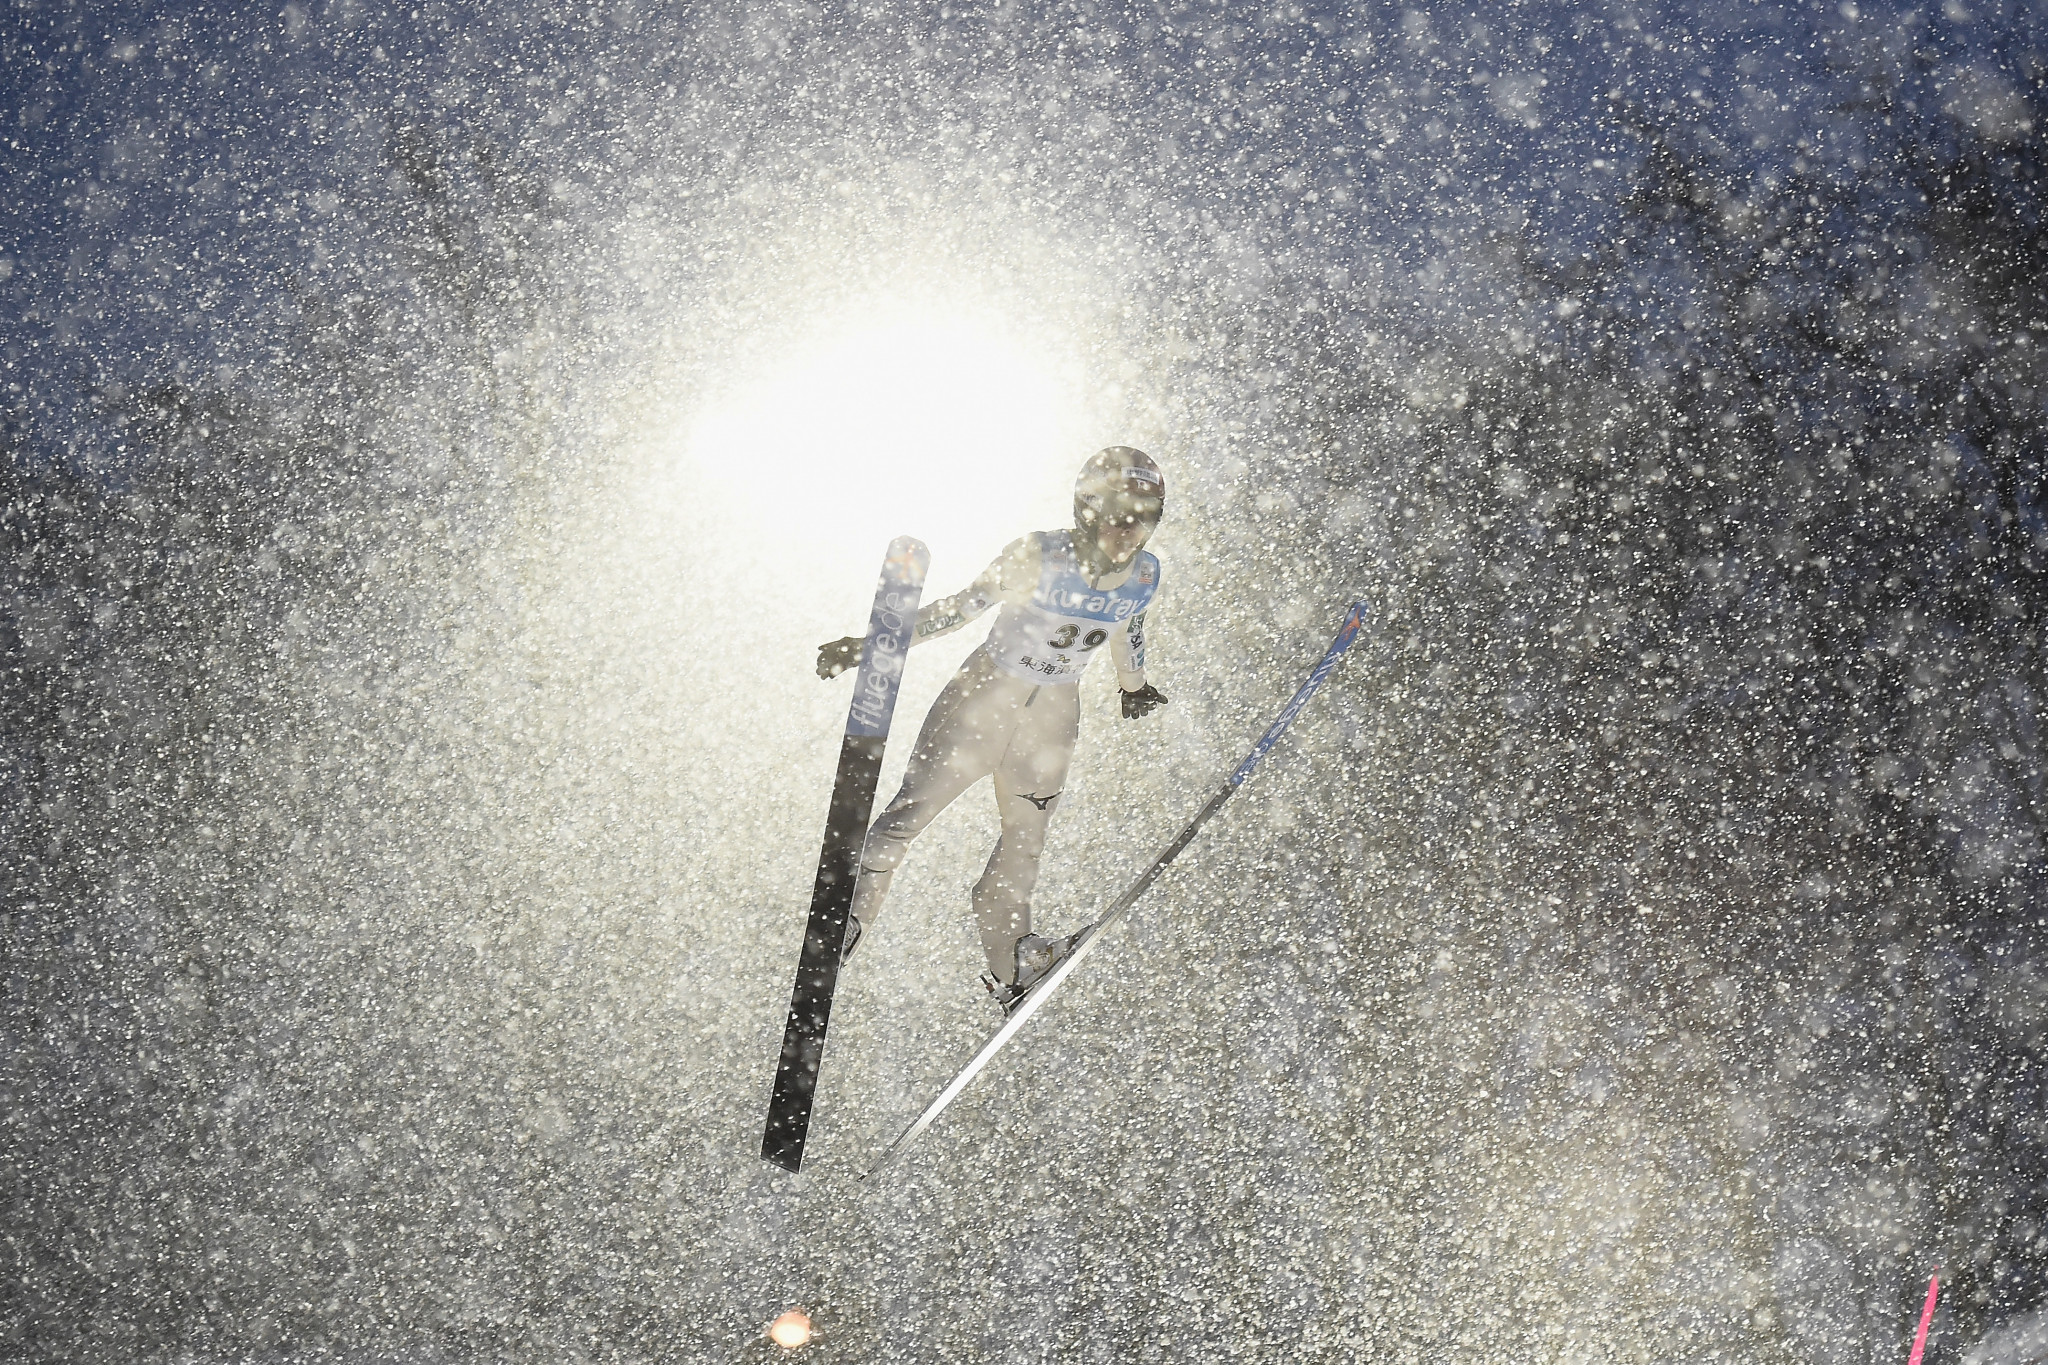 Qualifying action at the FIS Ski Jumping World Cup in Zao had to be postponed due to strong winds and heavy snowfall ©Getty Images